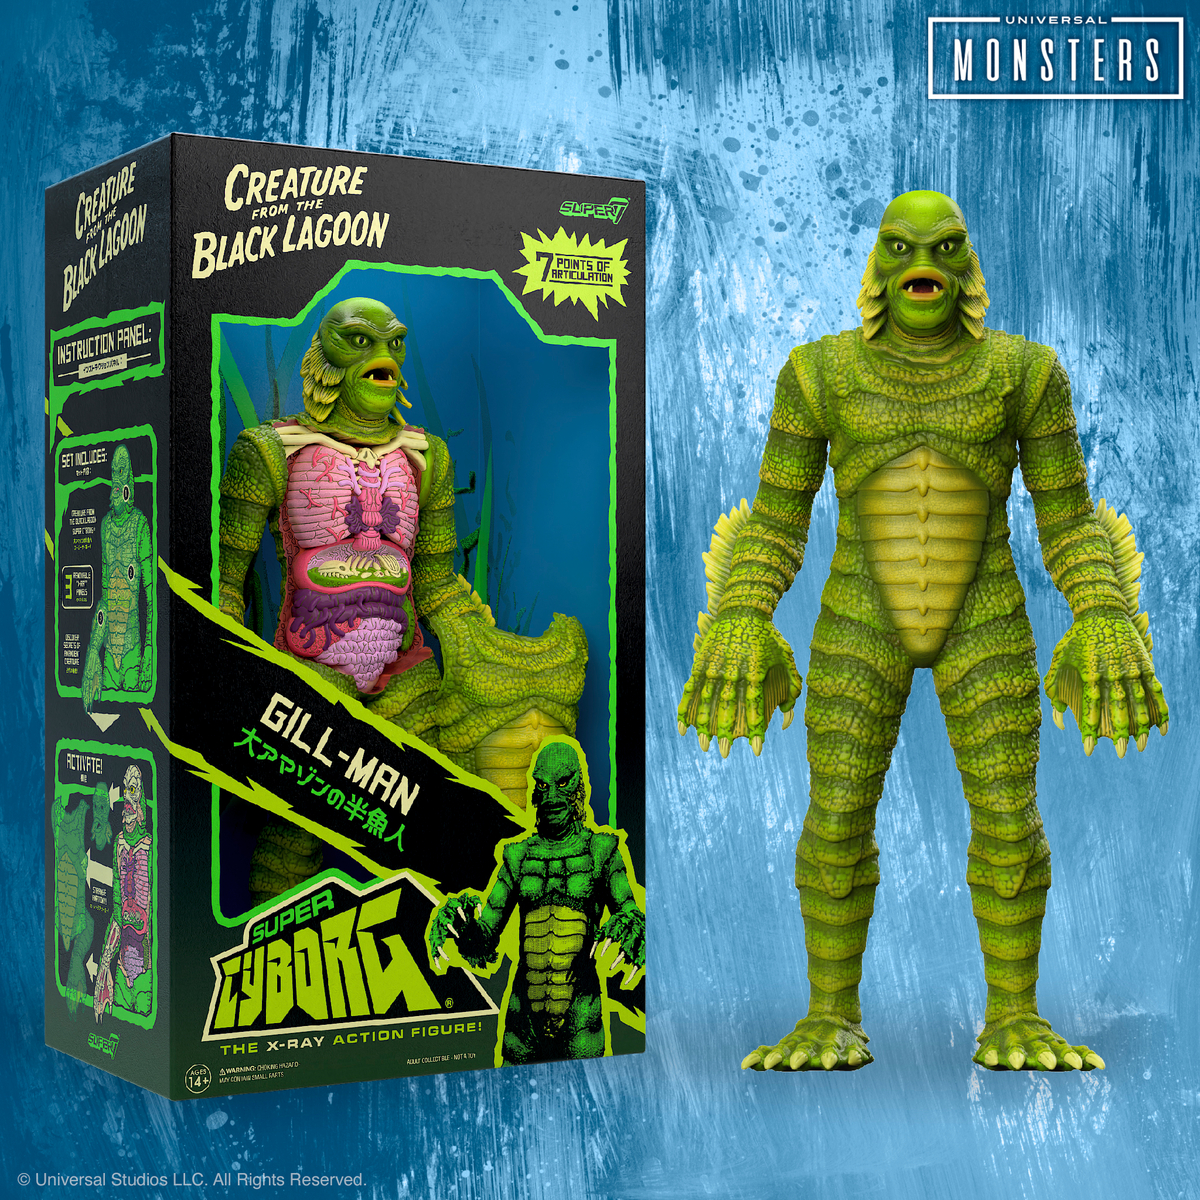 The 11” tall, highly articulated, Creature Super Cyborg has intricate sculpt and premium paint detailing, with three removable plates that let you examine some of the finer details of its anatomy. Available now at Super7.com! #Super7